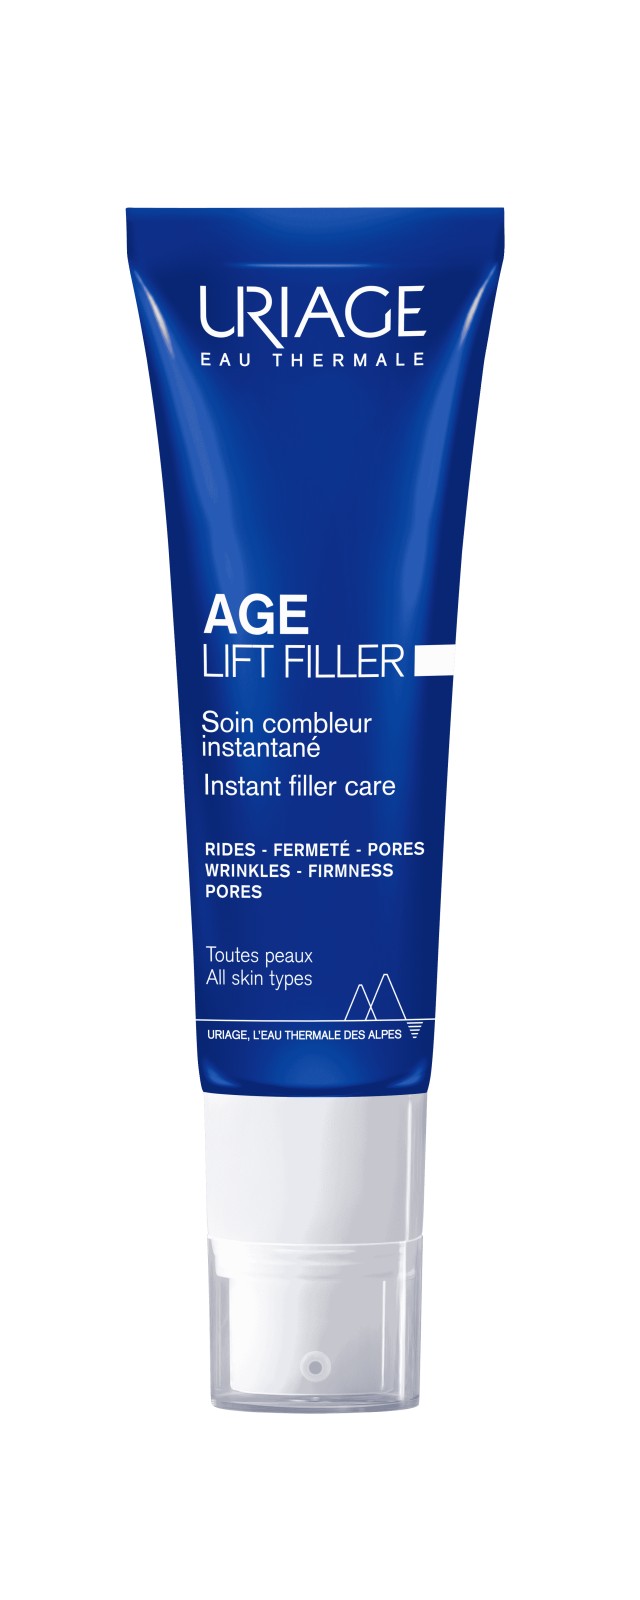 Uriage Age Lift Filler Instant Filler Care with Retinol + Hyaluronic Acid + Pore Refiner All Skin Types 30ml